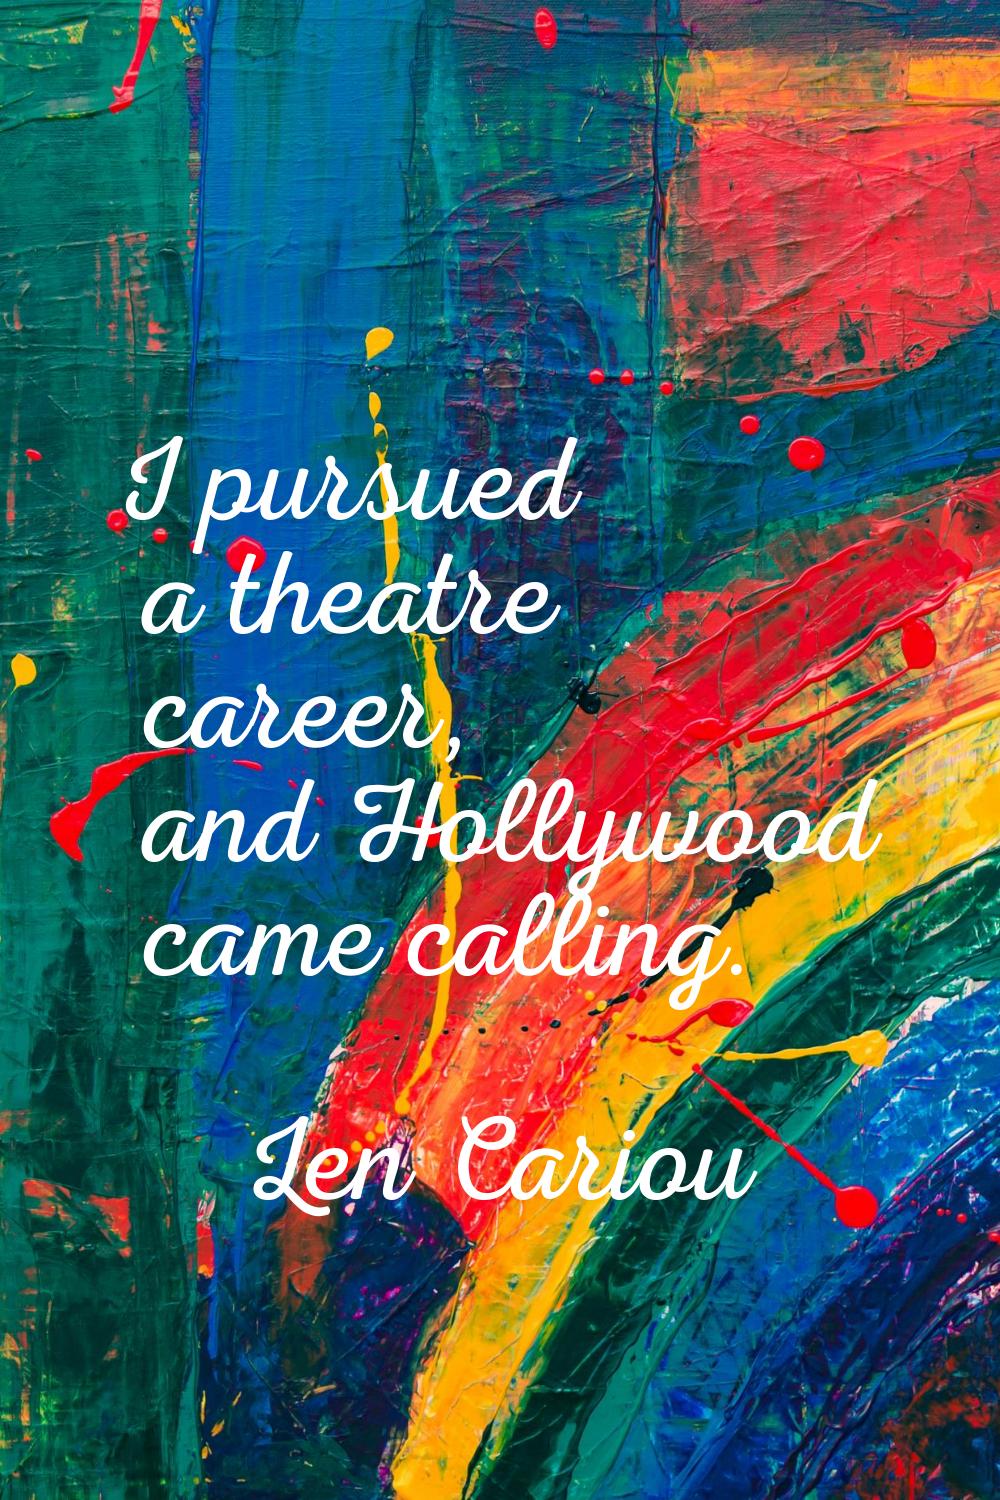 I pursued a theatre career, and Hollywood came calling.